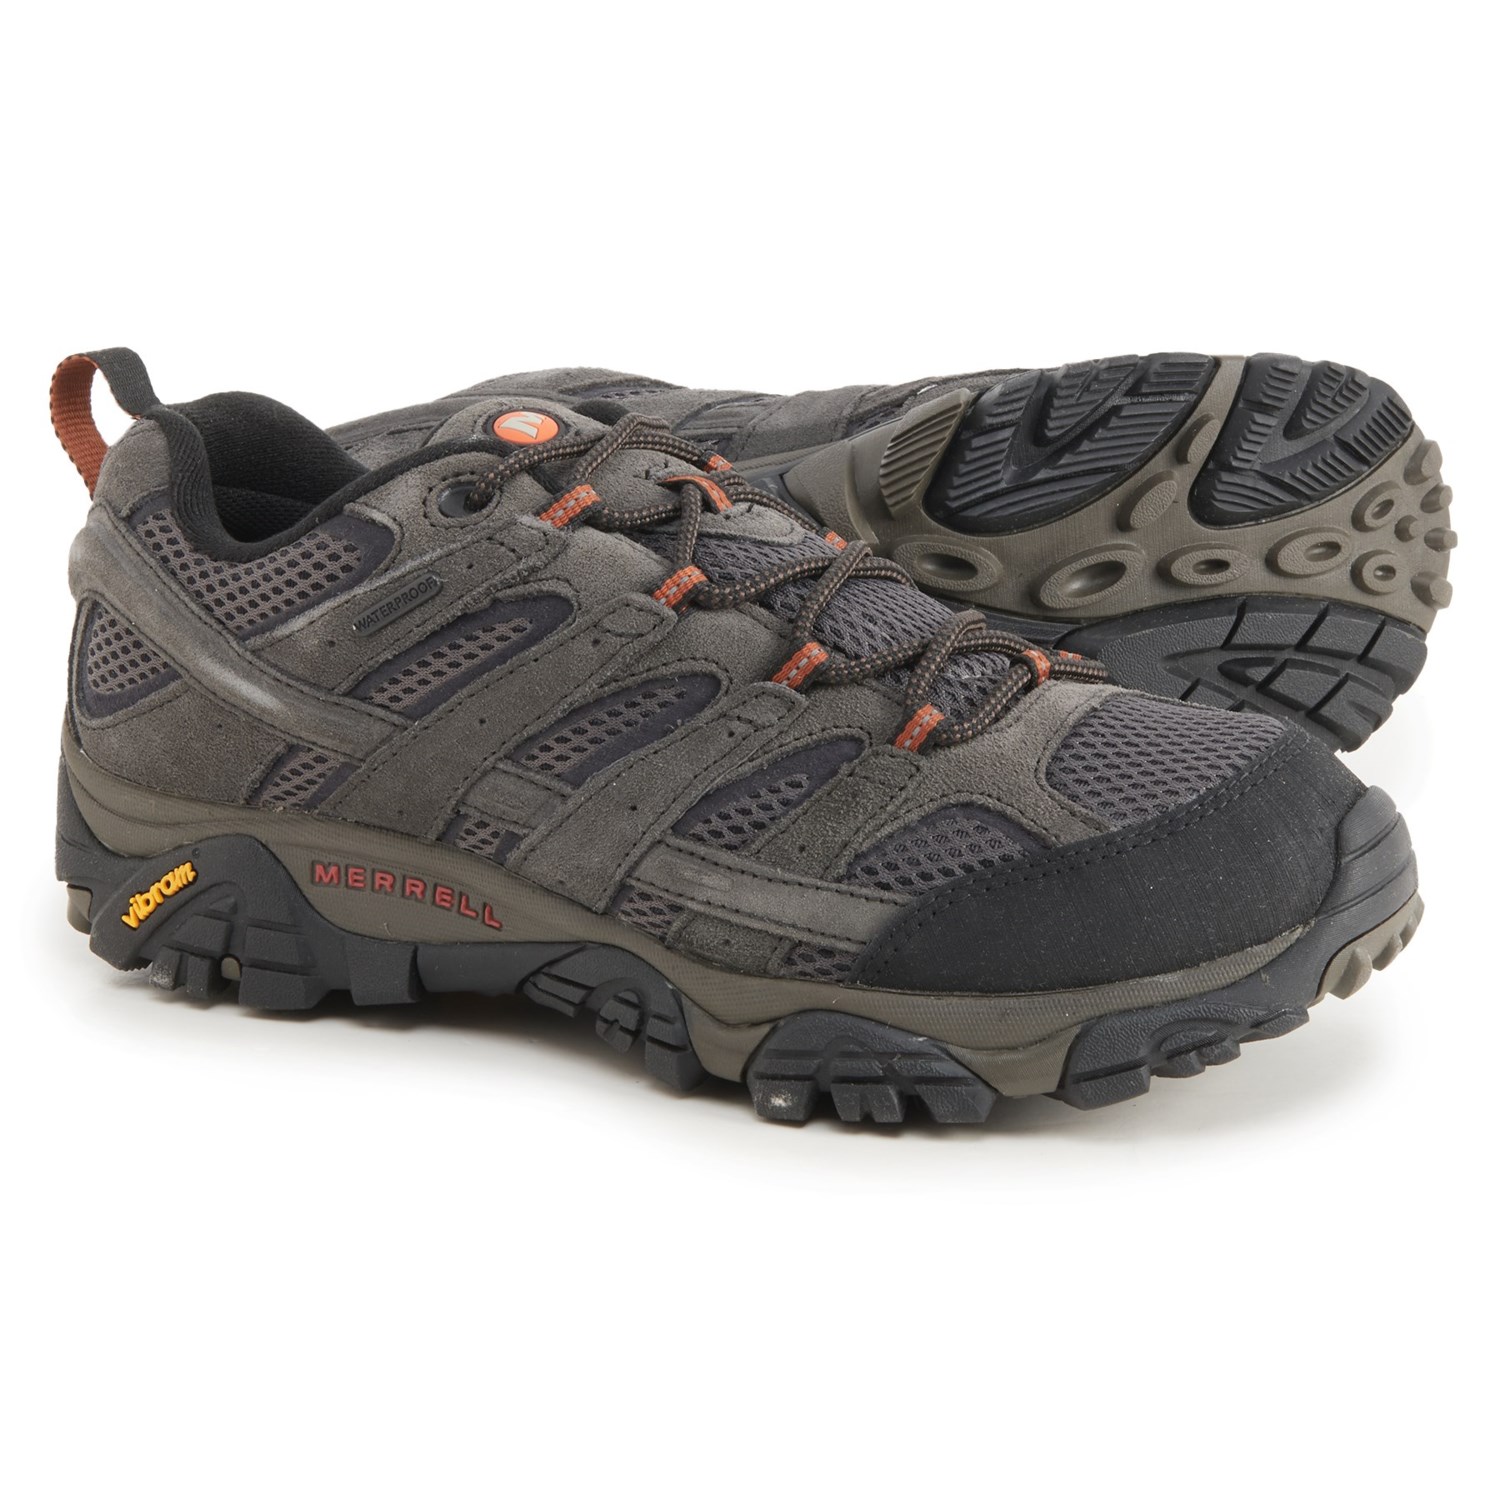 Merrell Moab 2 Hiking Shoes - Waterproof (For Men)